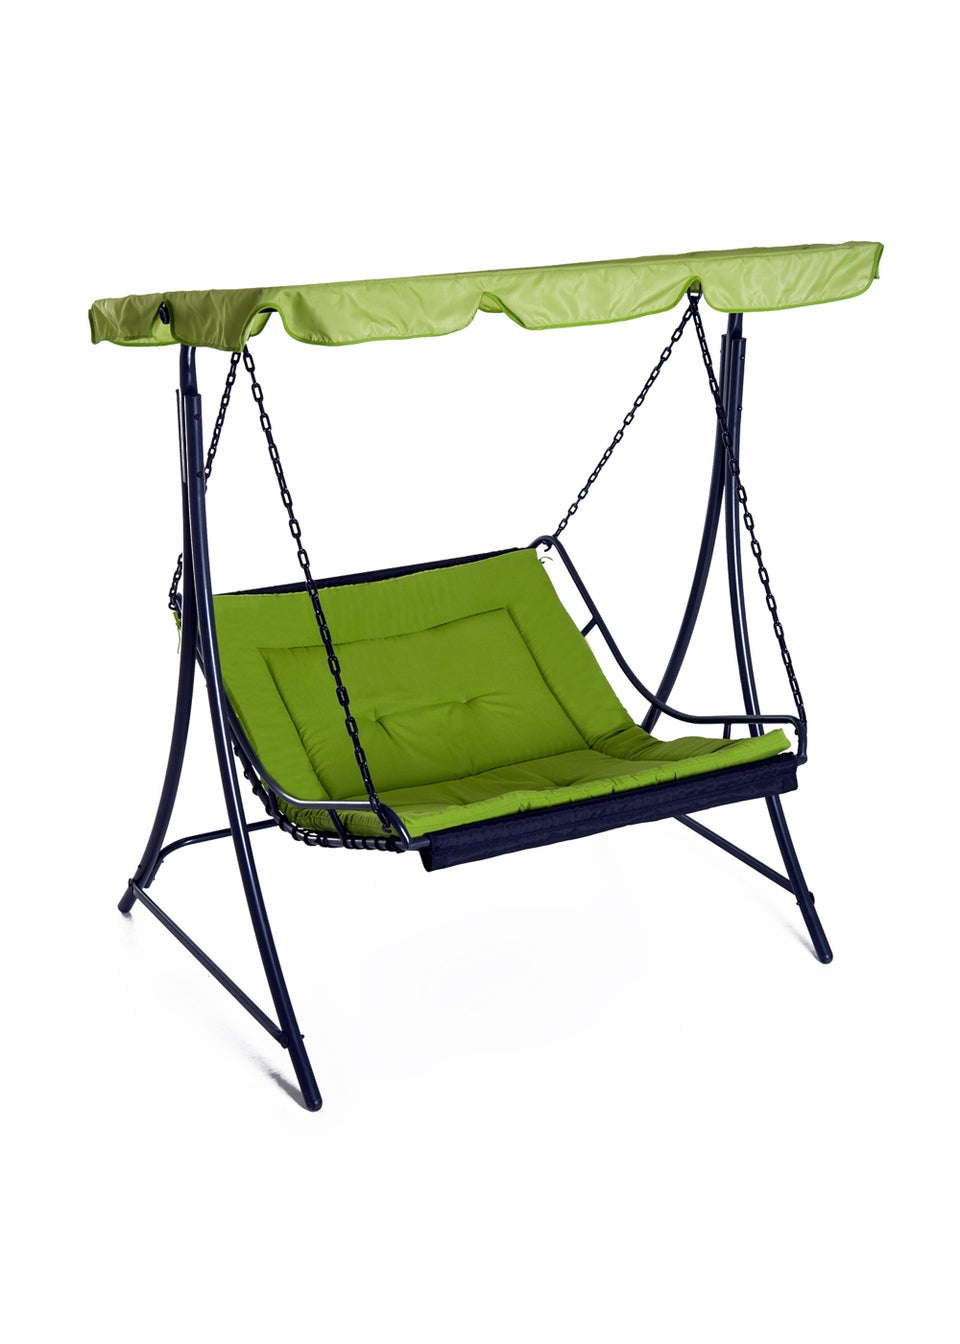 Outsunny 2 Seater Garden Swing Seat Bed, Sun Lounger with Adjustable Canopy Green